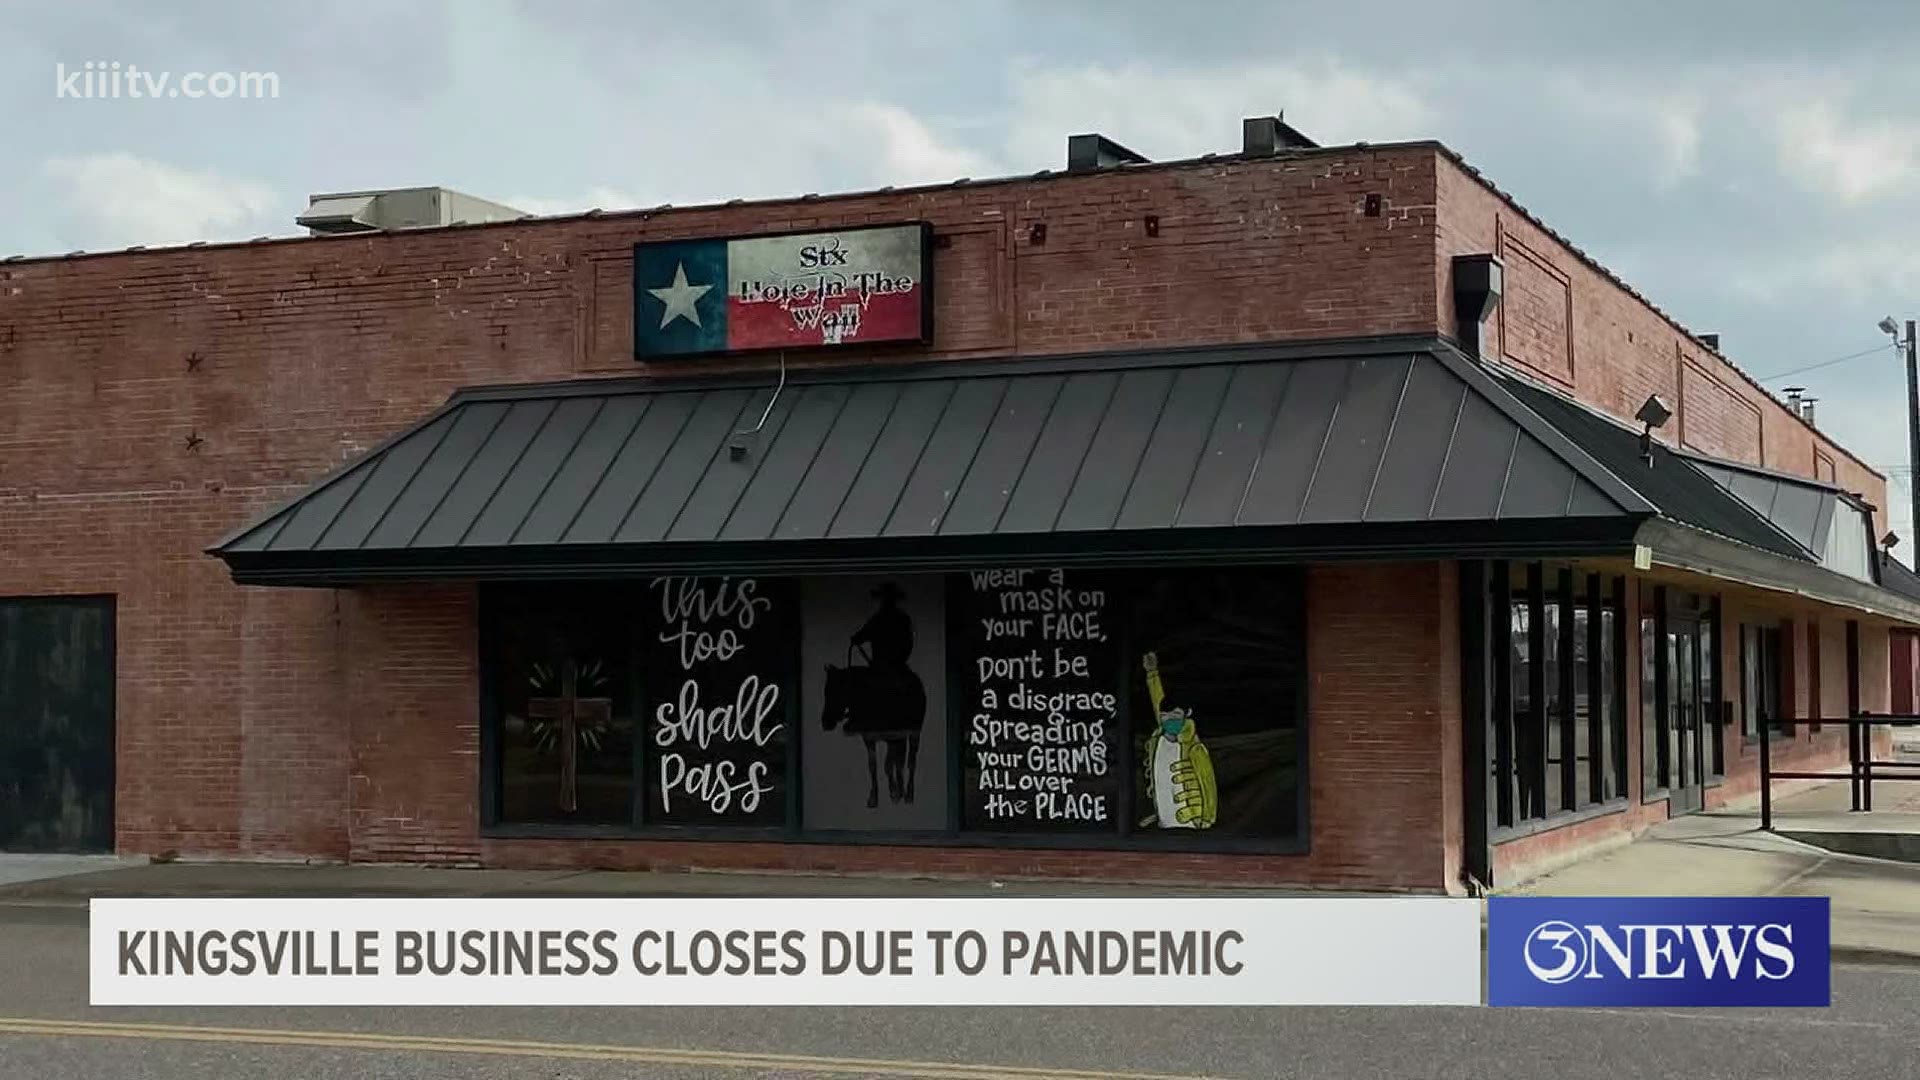 The restaurant opened nearly a year ago. Since then, it's been an uphill battle with the pandemic challenges.